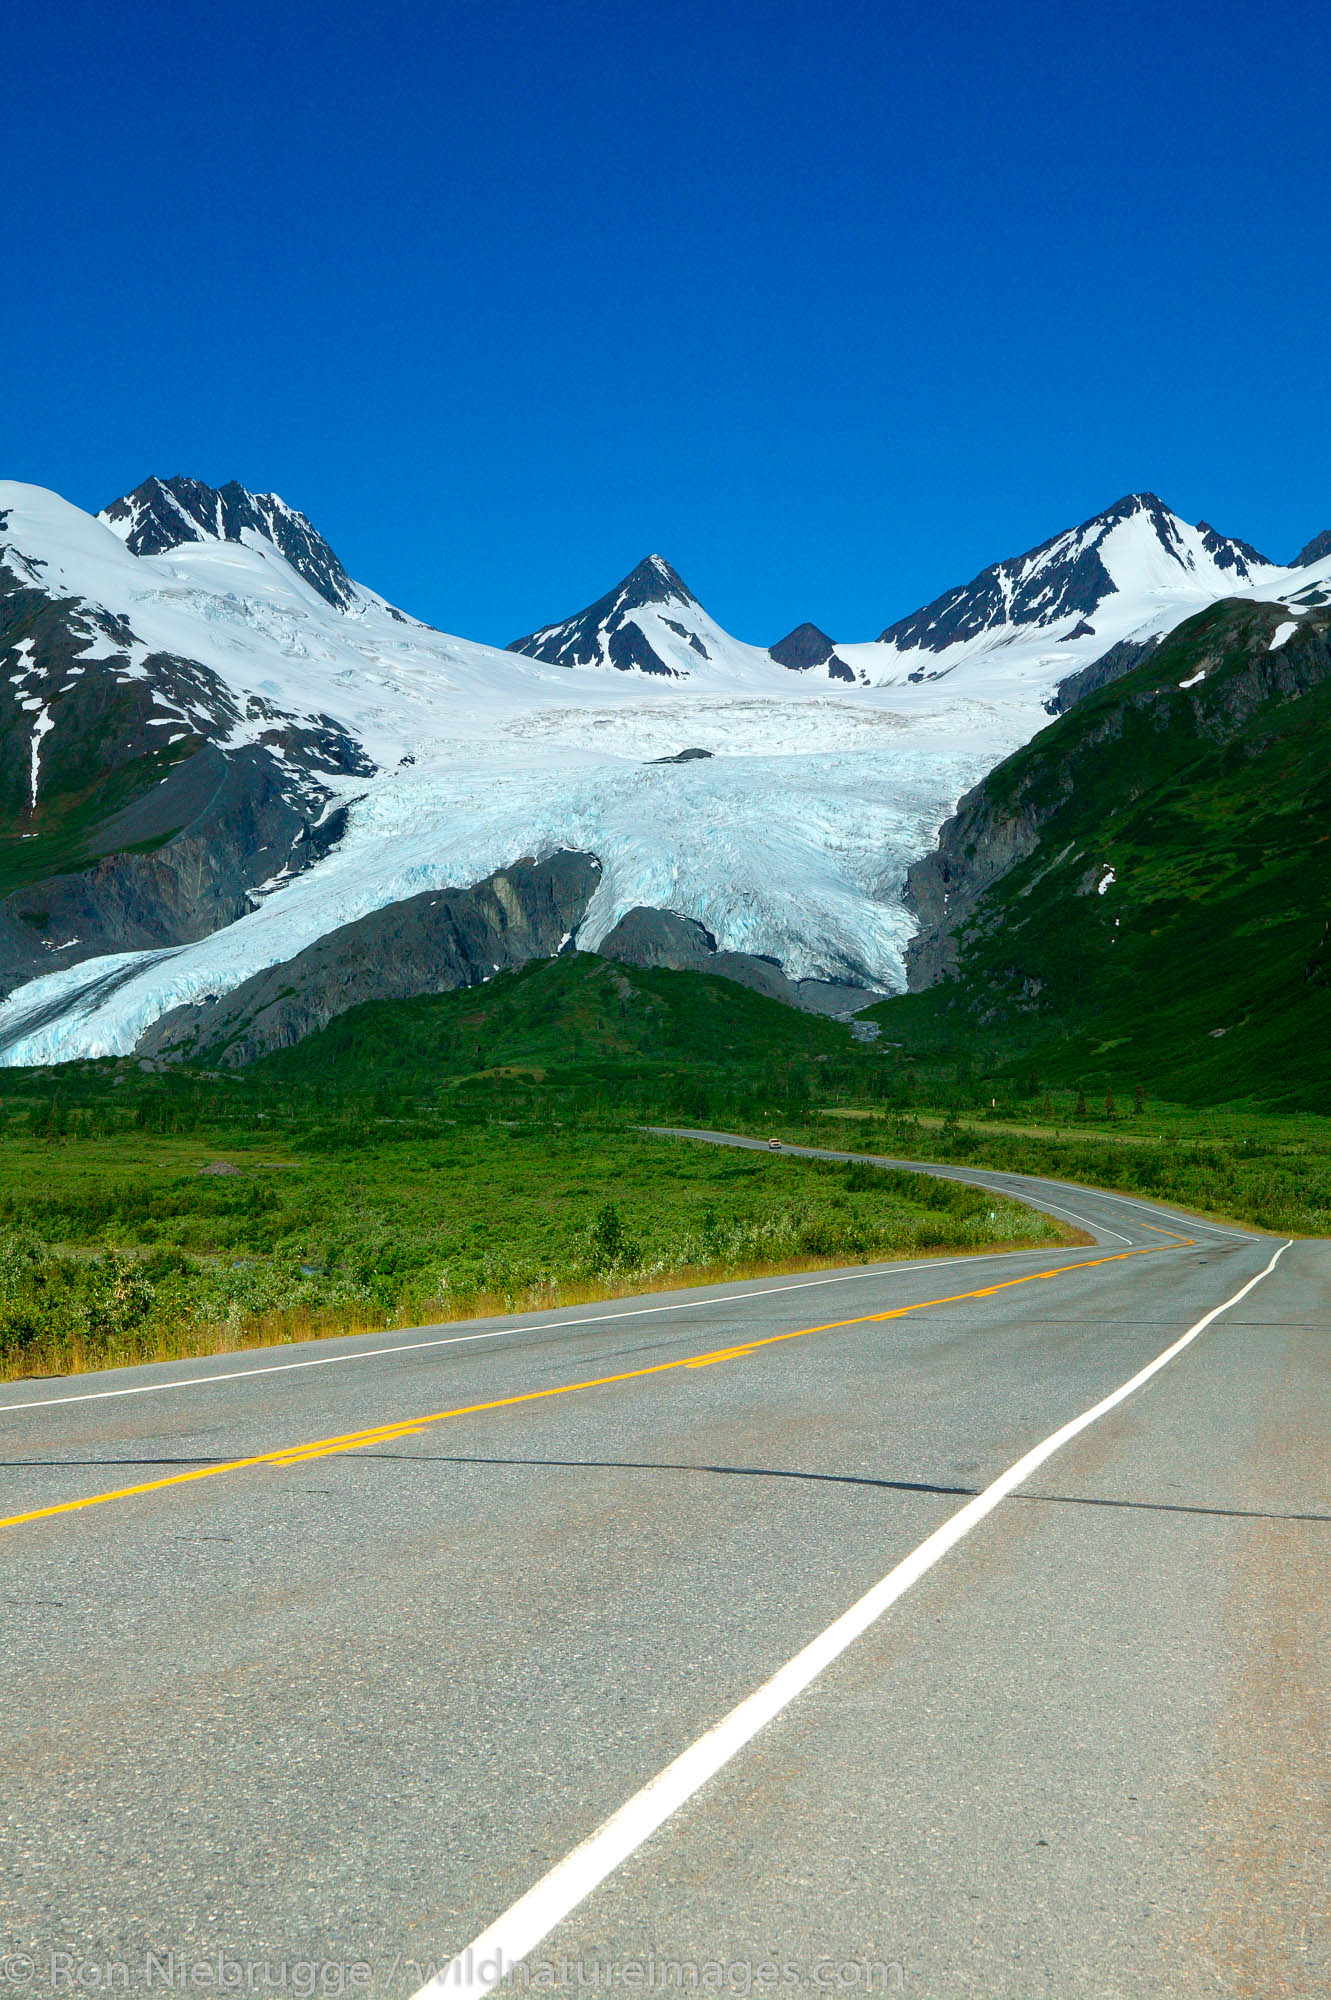 The Richardson Highway travels through the Chugach Mountains and Chugach National Forest as it passes over Thompson Pass on the...